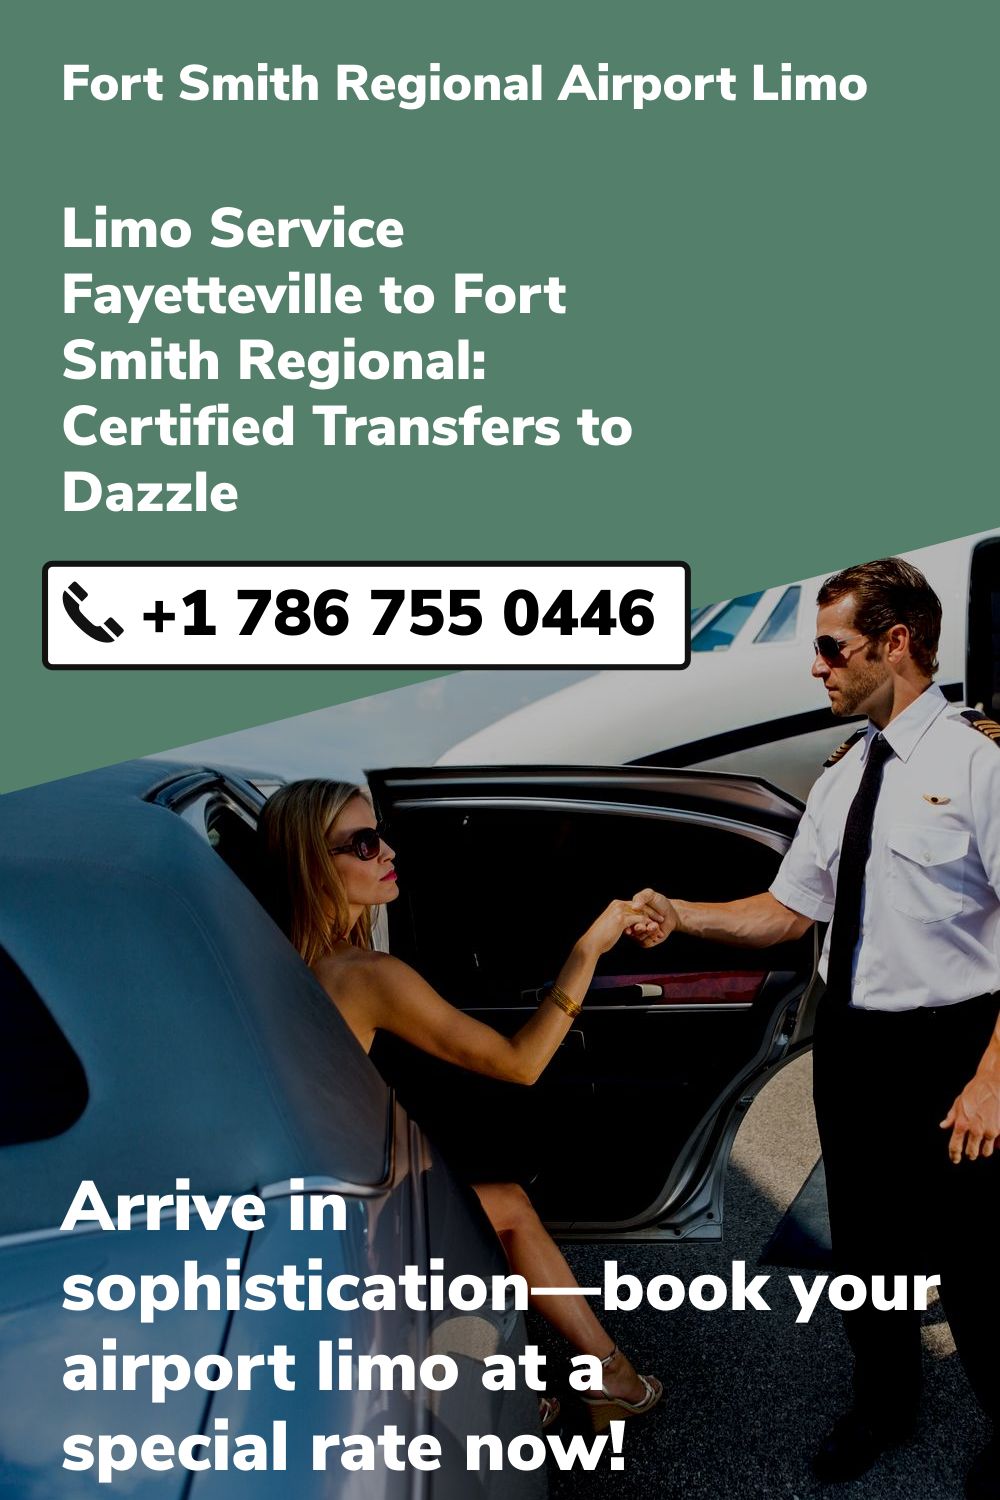 Fort Smith Regional Airport Limo